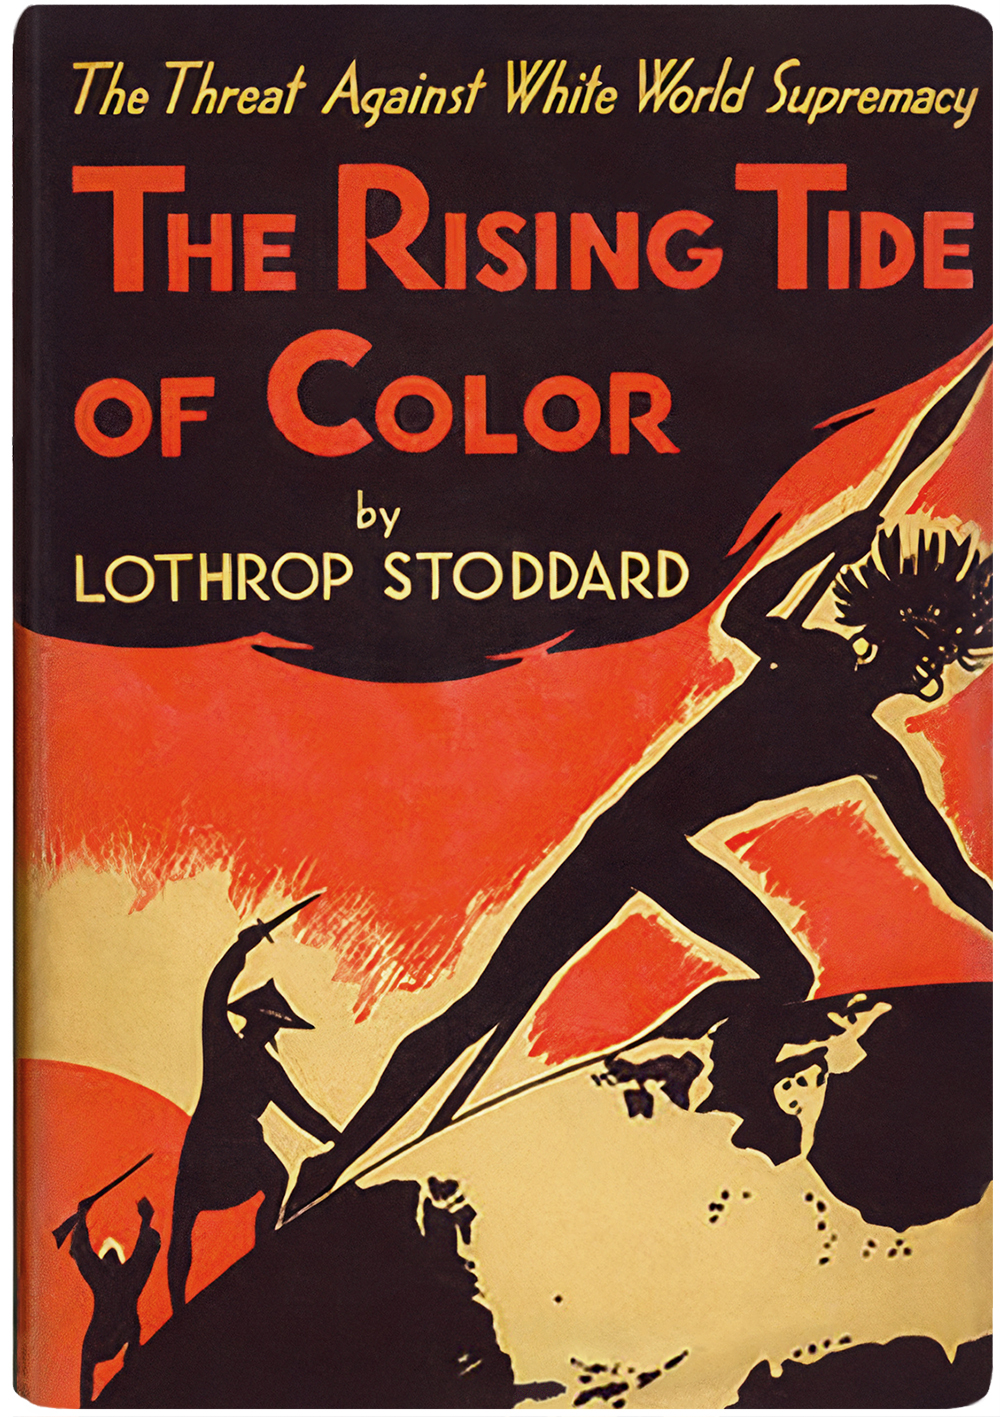 Dust_jacket%2C_first_edition_of_The_Rising_Tide_of_Color_Against_White_World-Supremacy.jpg